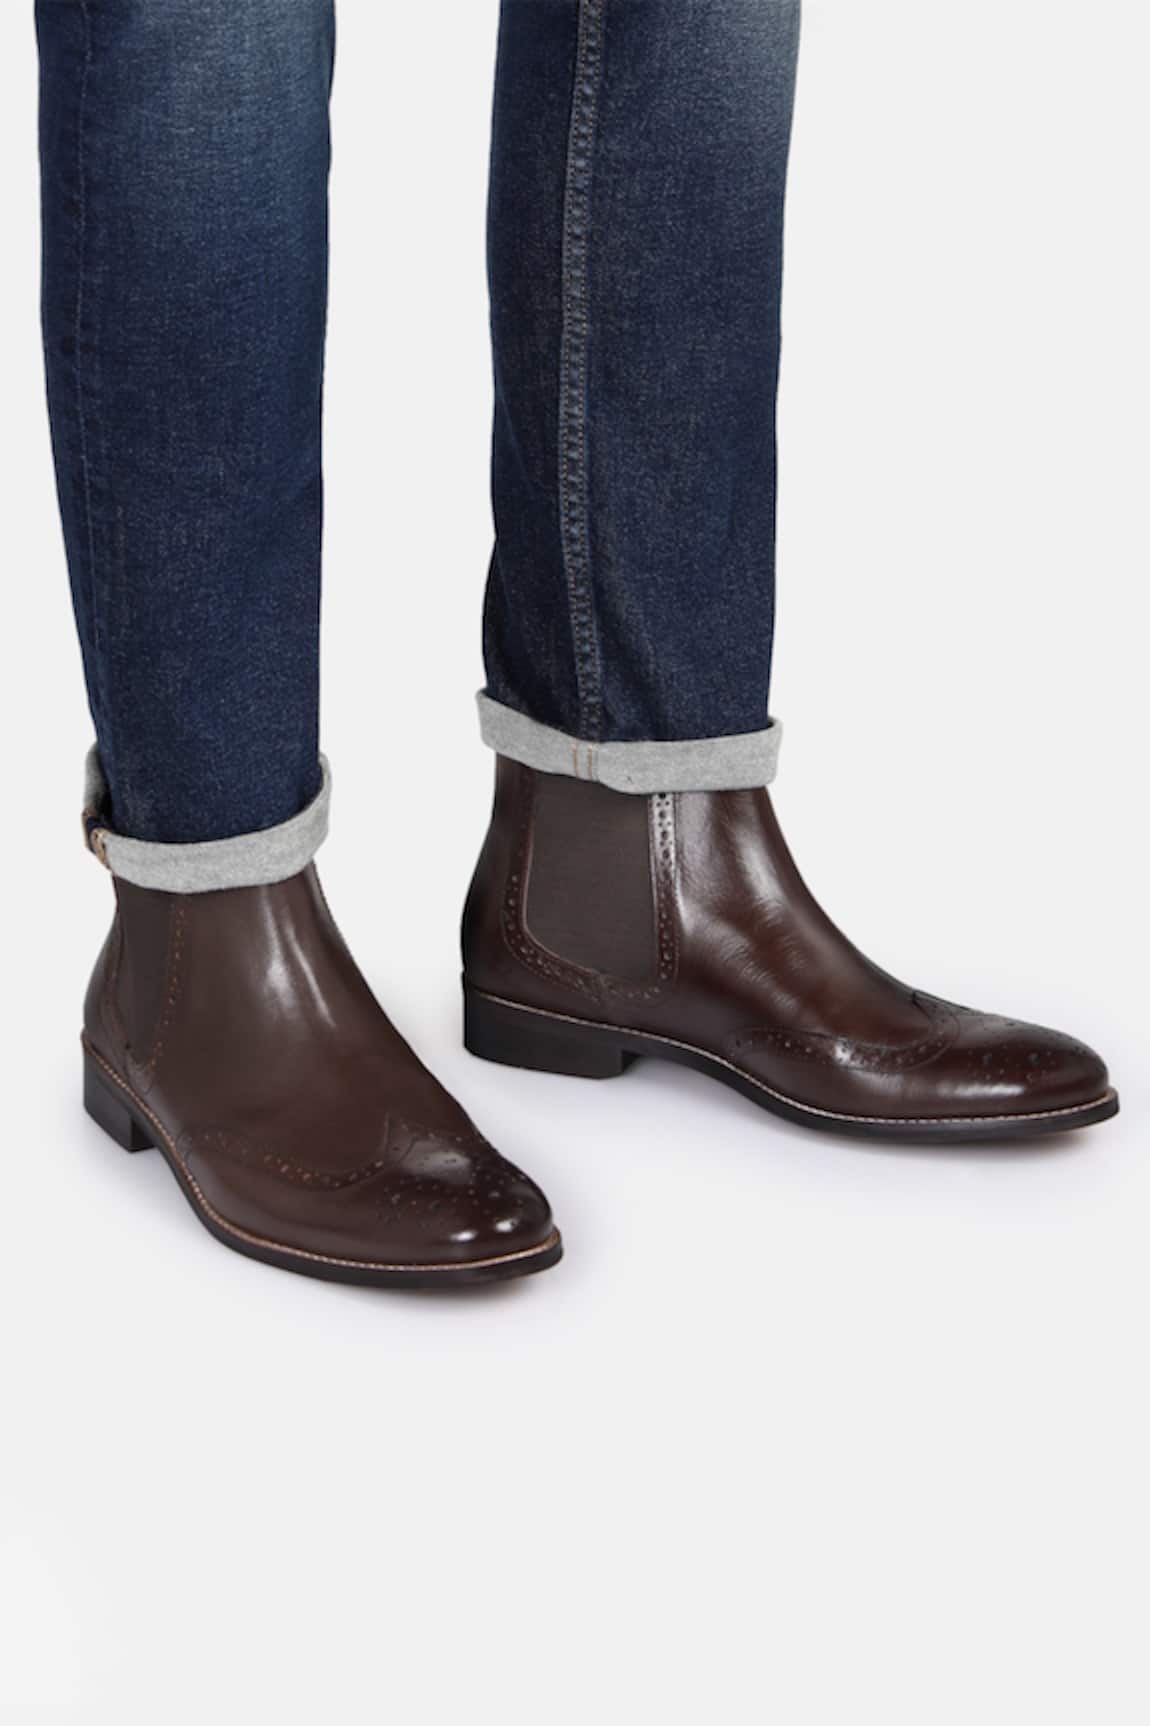 Hats Off Accessories Leather Burnish Chelsea Boots